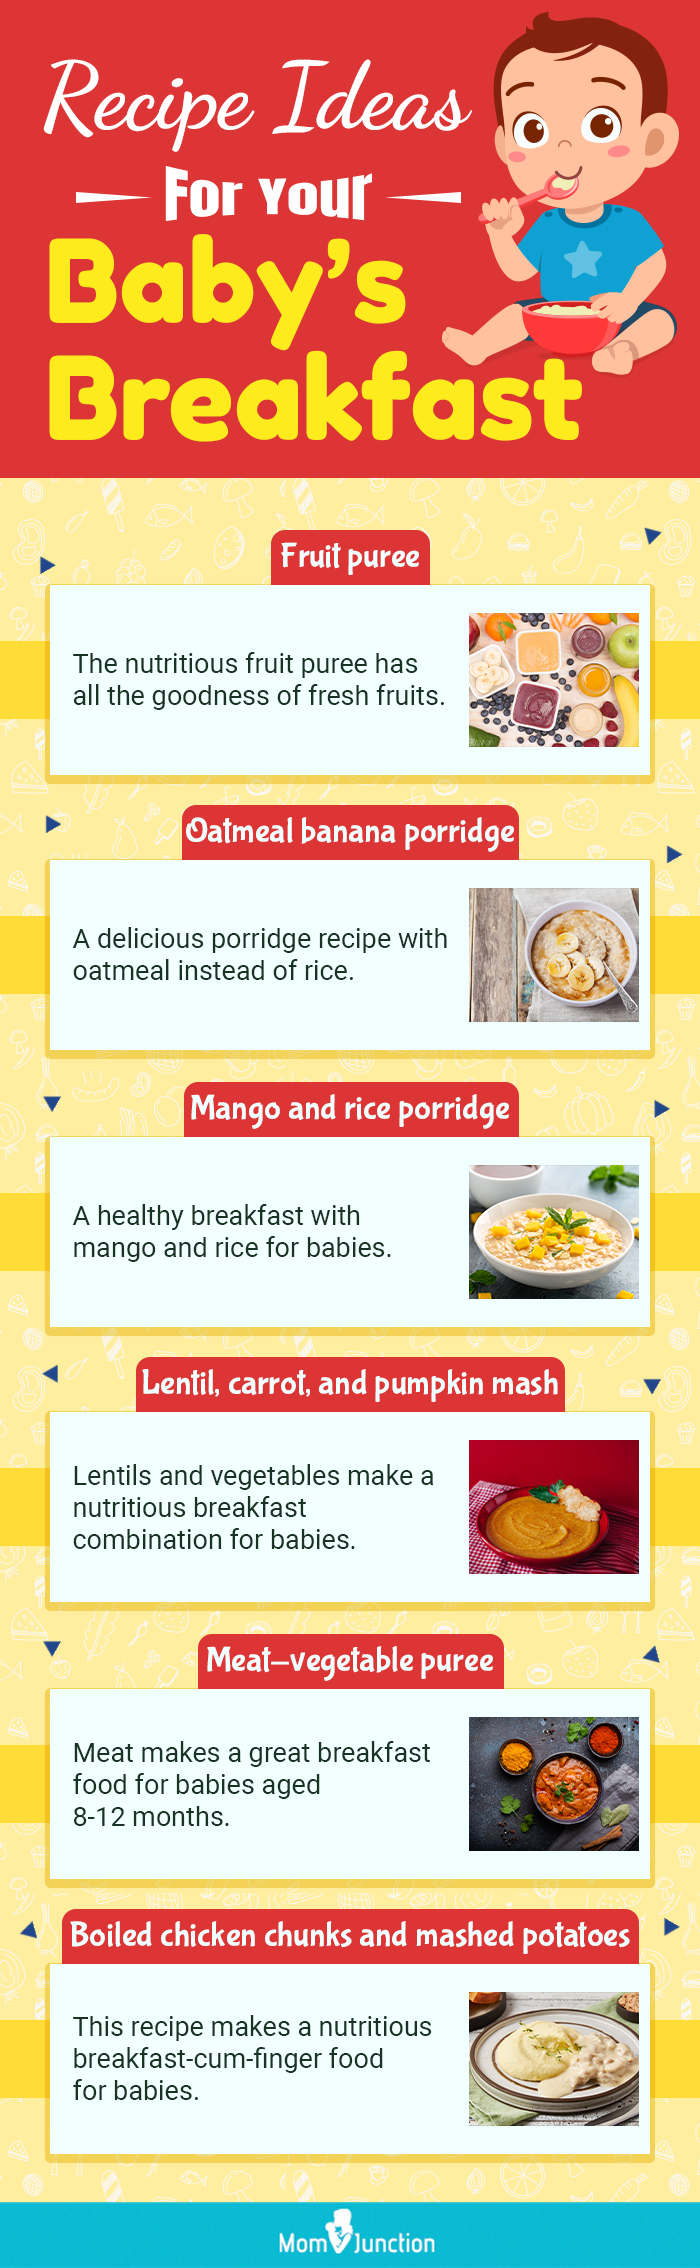 recipe ideas for your babys breakfast [infographic]